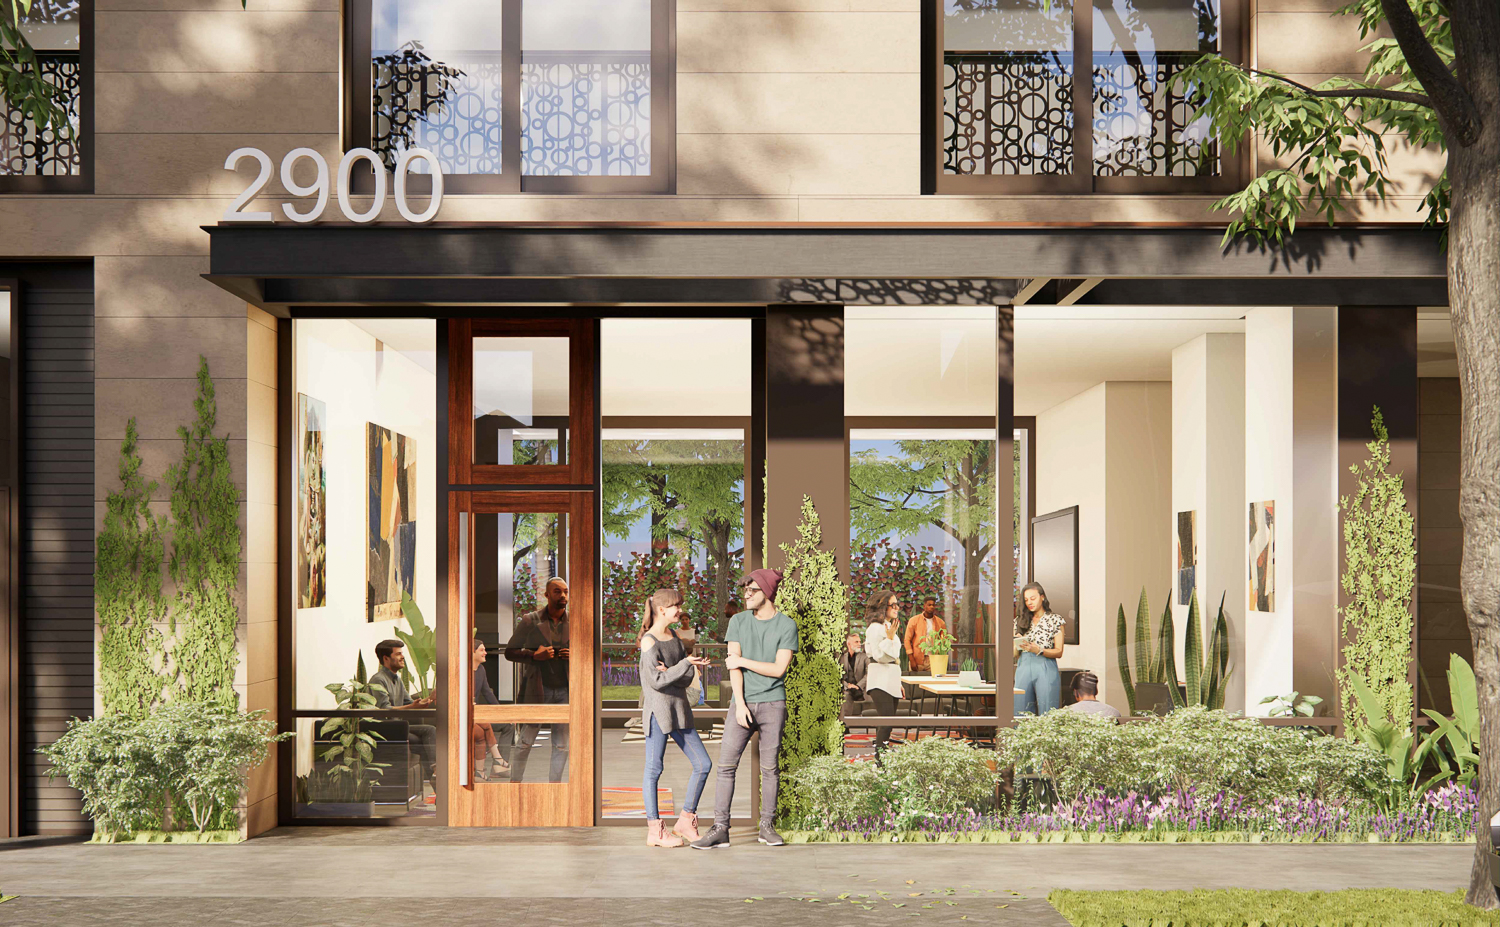 2900 Shattuck Avenue main lobby entry, rendering by Trachtenberg Architects